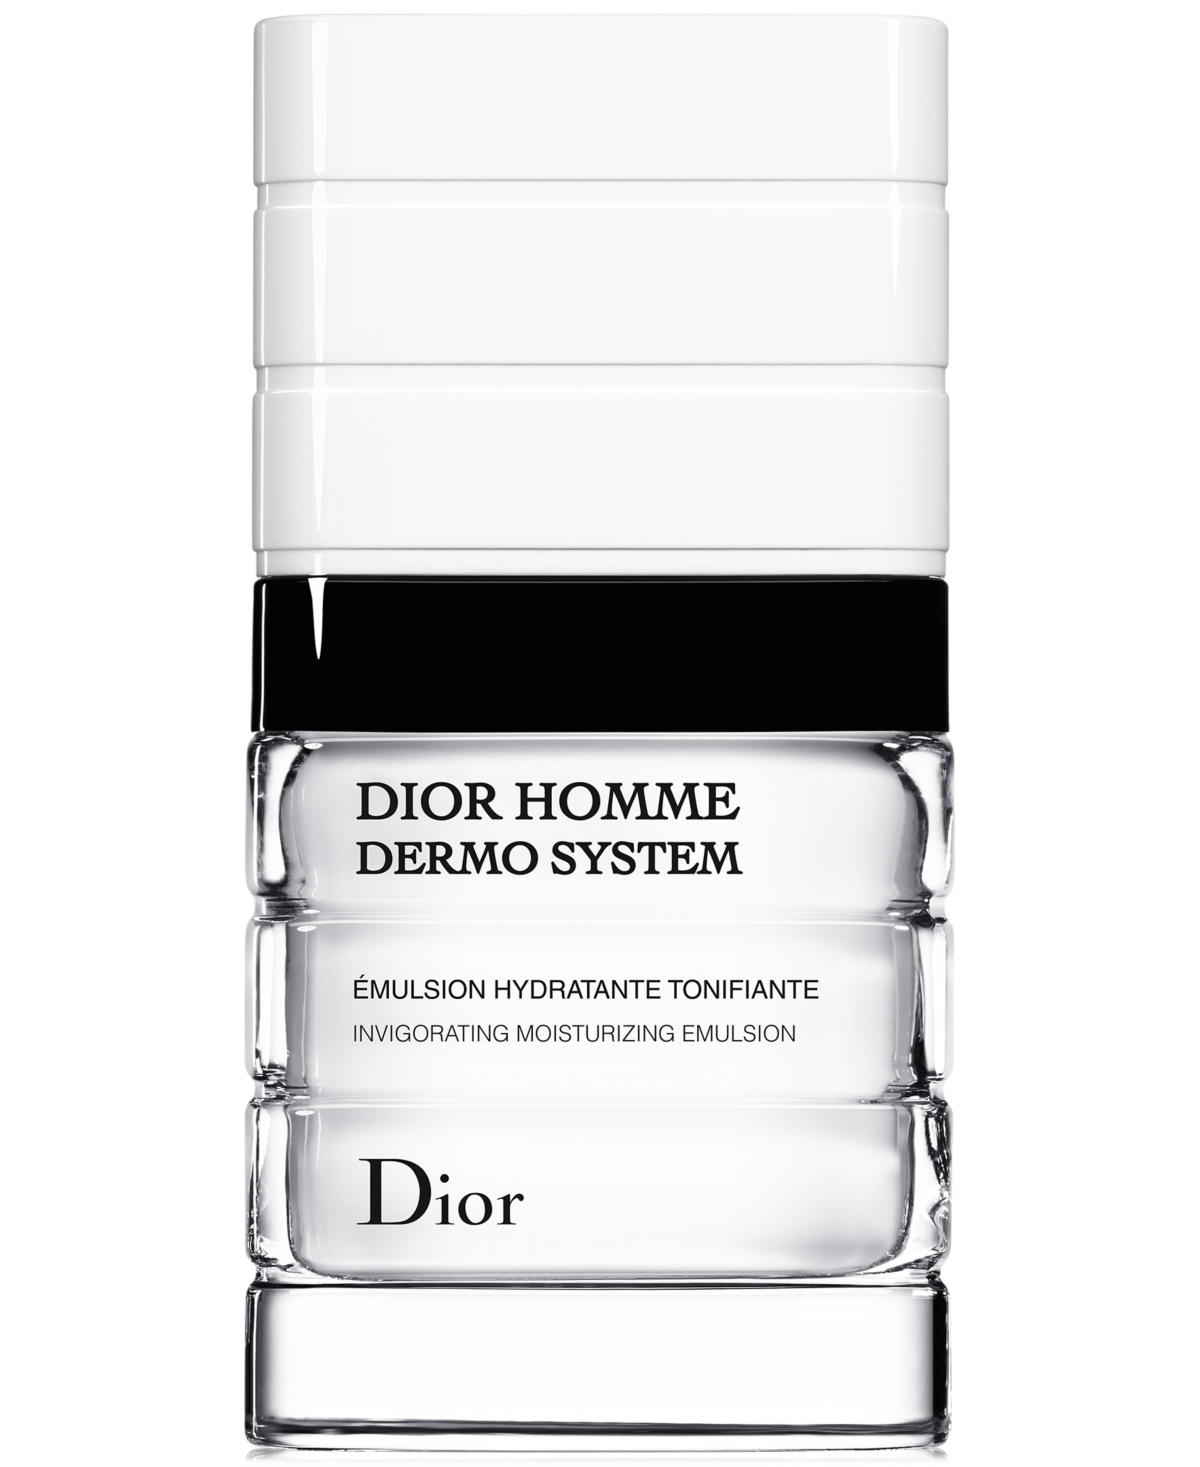 Dior Homme Dermo System Repairing Moisturizing Emulsion, 1.7oz In No Color